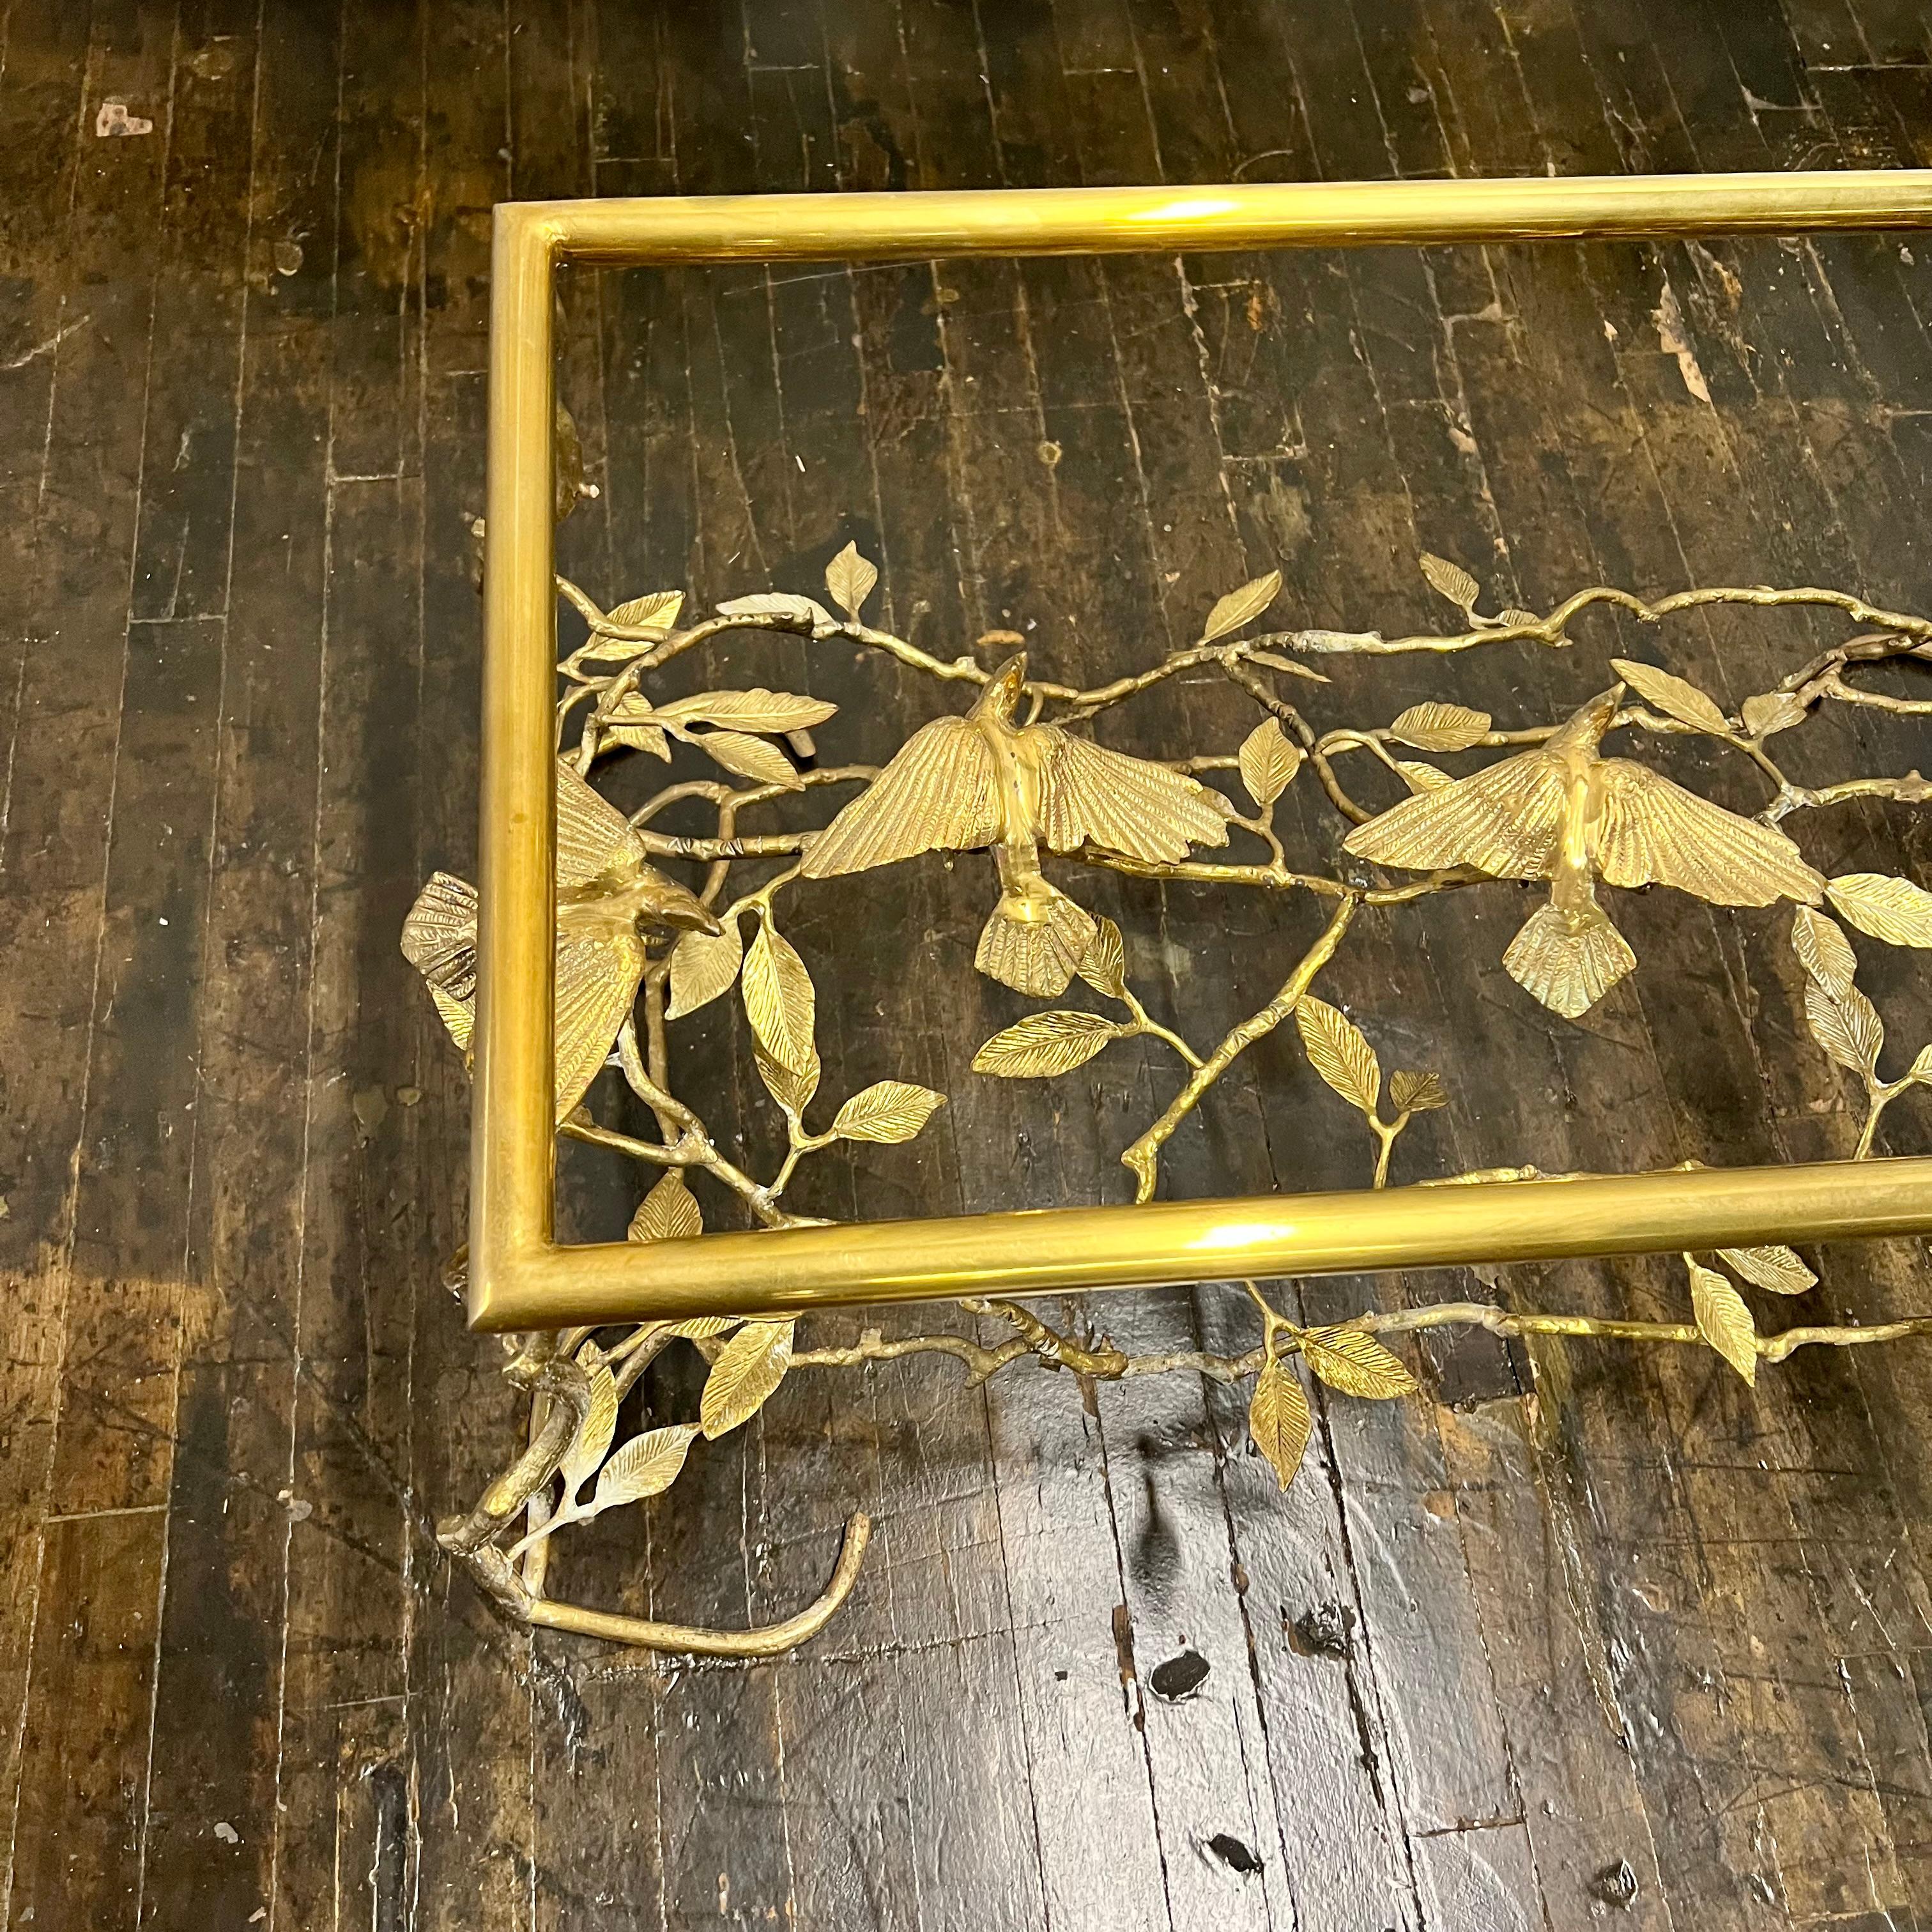 Beautiful organic tree form brass cocktail or coffee table with birds, nice overall bronzed patina finish. Intricately constructed with branches that are filled with scattered leaves and perched birds. The table base is suited for a rectangular